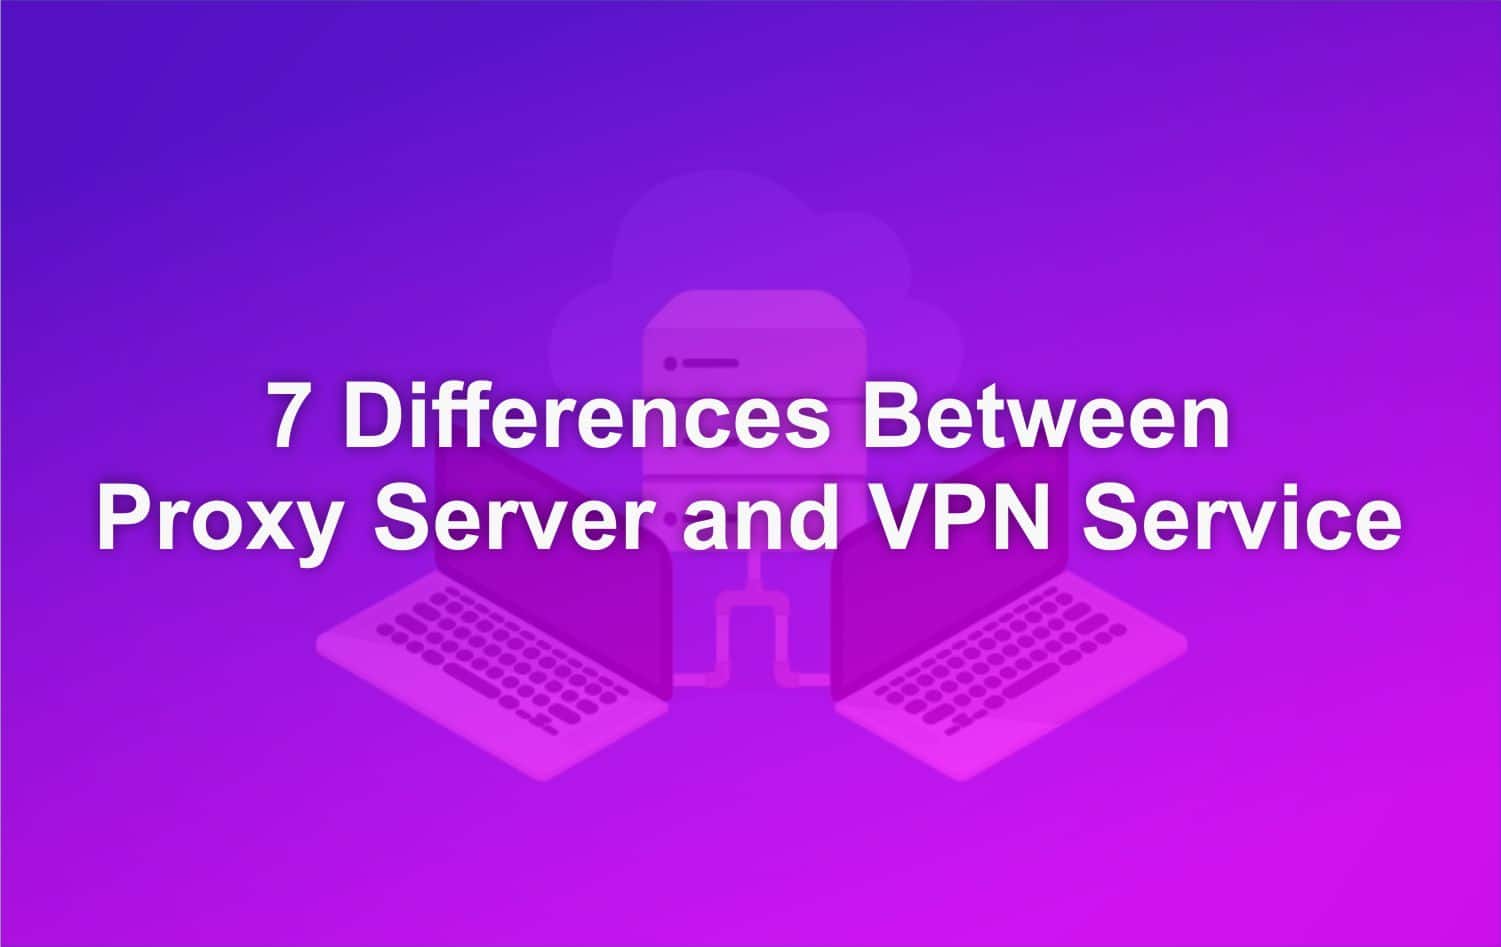 7 Differences Between Proxy Server and VPN Service